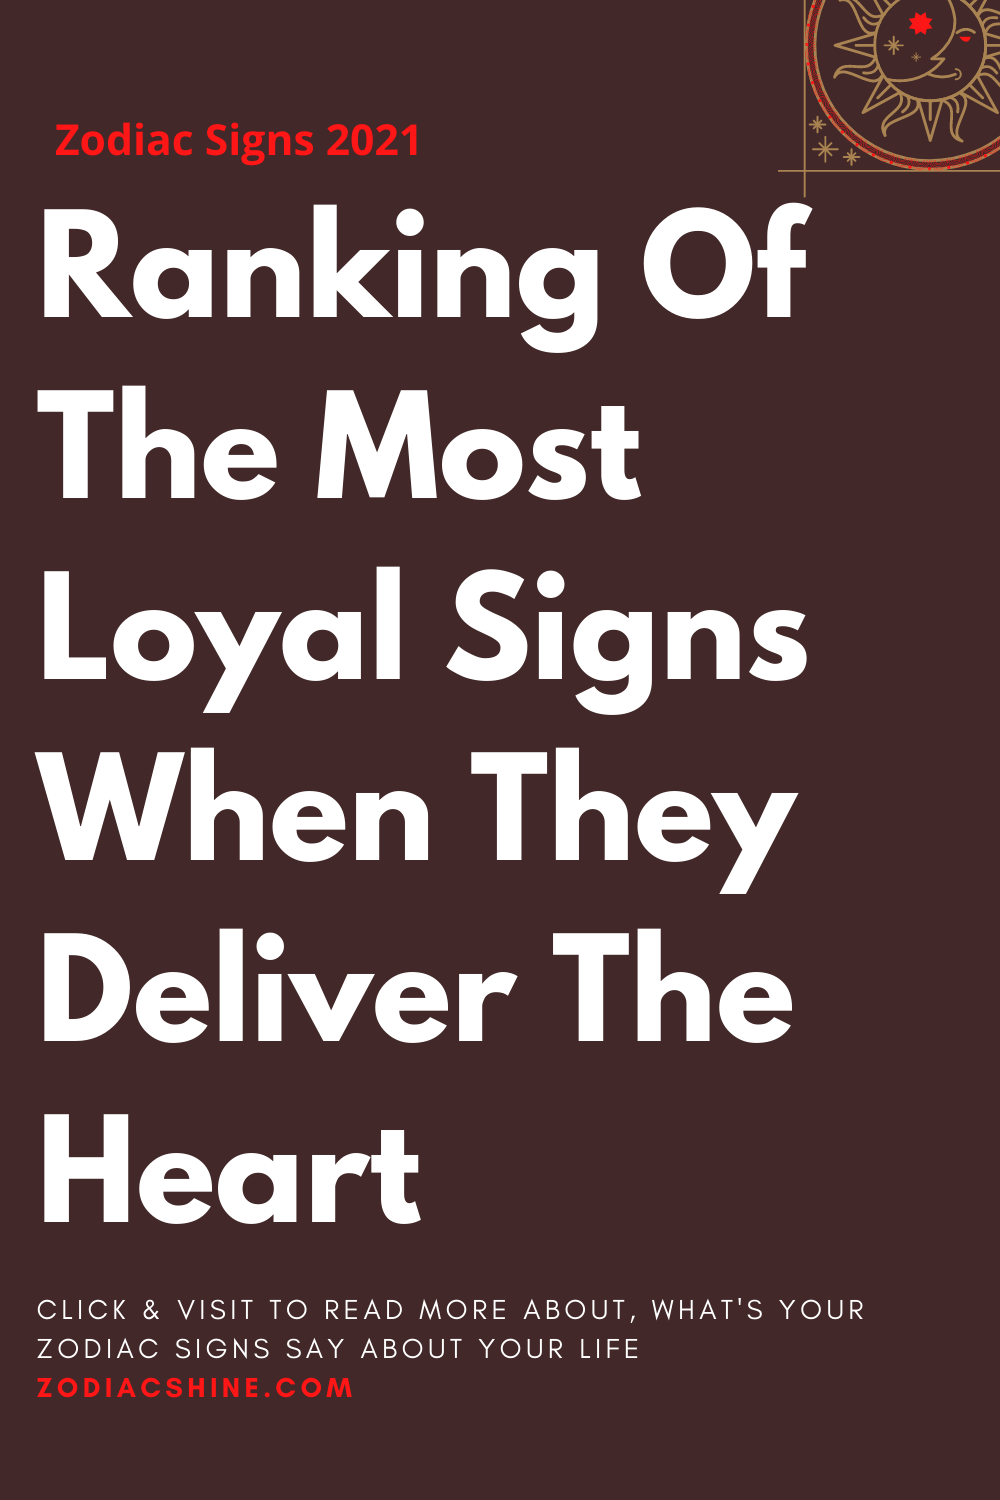 Ranking Of The Most Loyal Signs When They Deliver The Heart